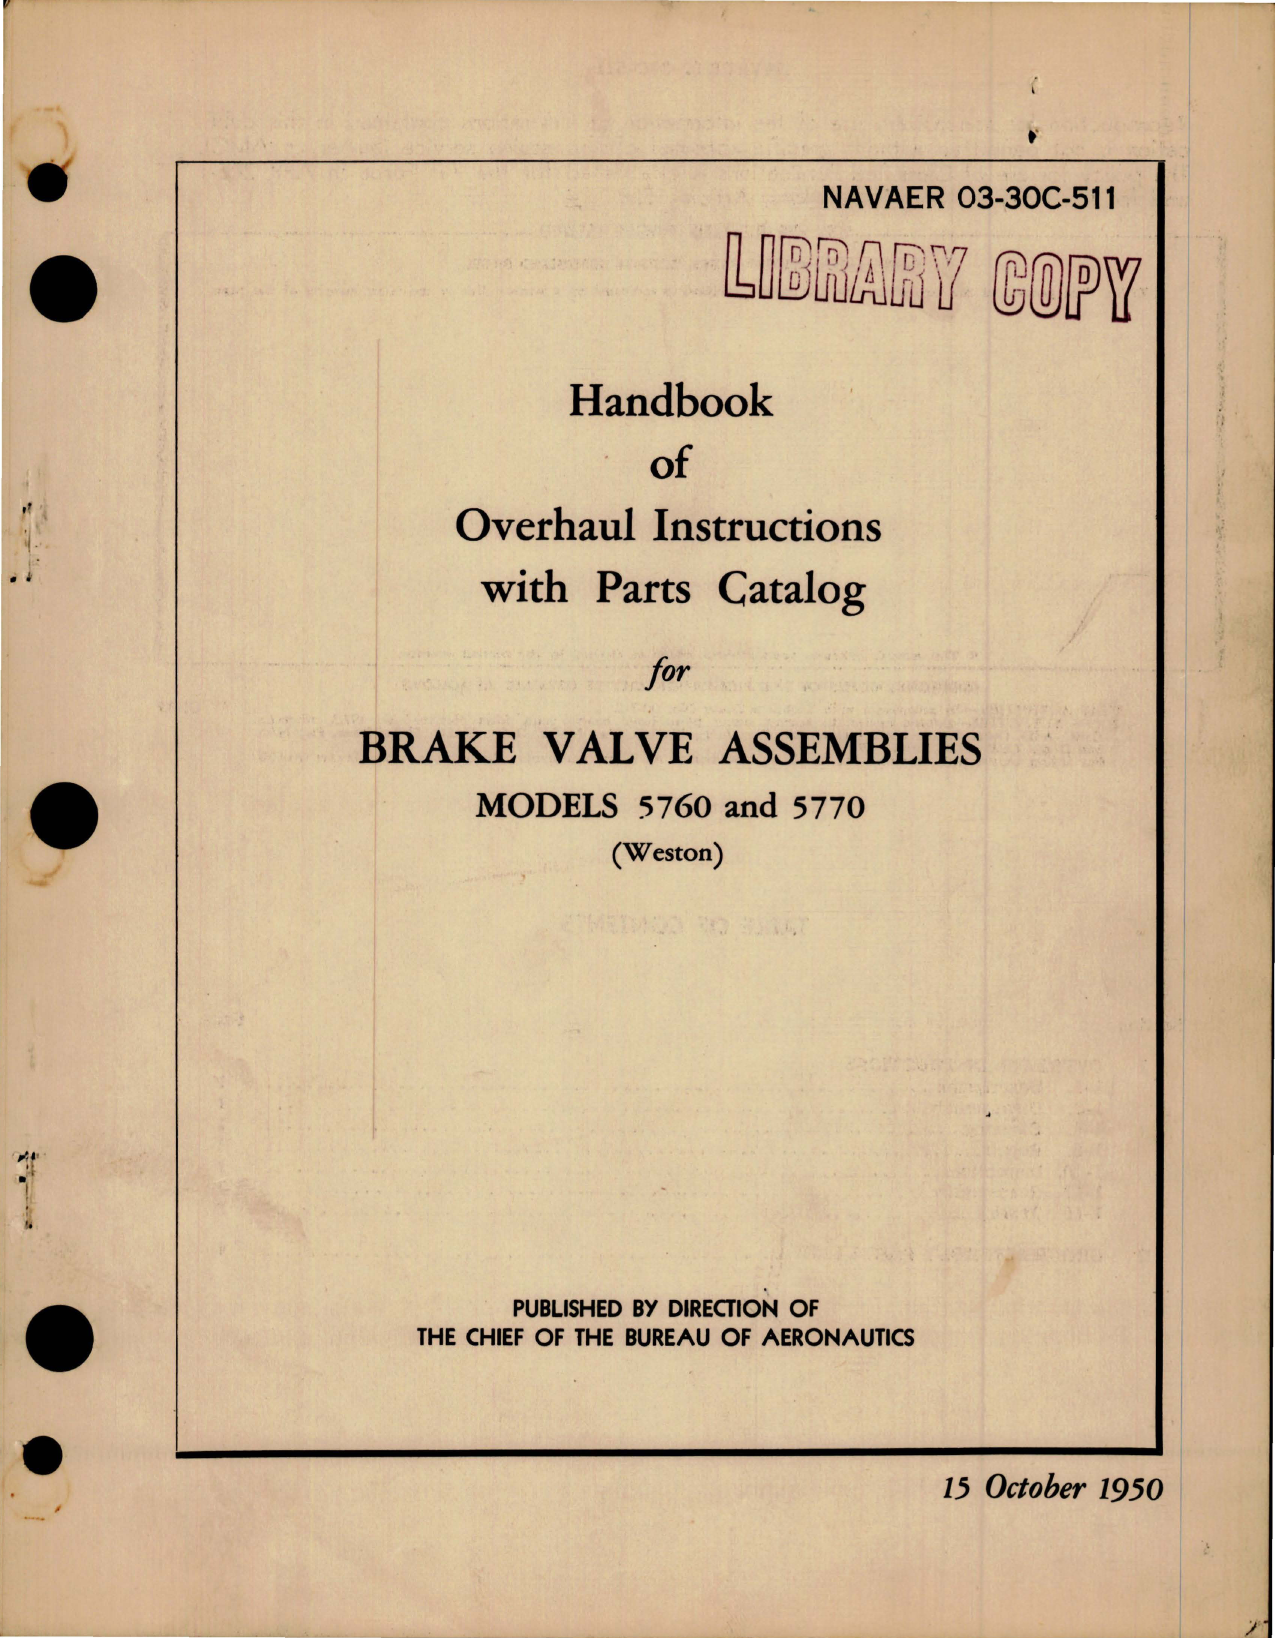 Sample page 1 from AirCorps Library document: Overhaul Instructions with Parts Catalog for Brake Valve Assemblies - Models 5760 and 5770